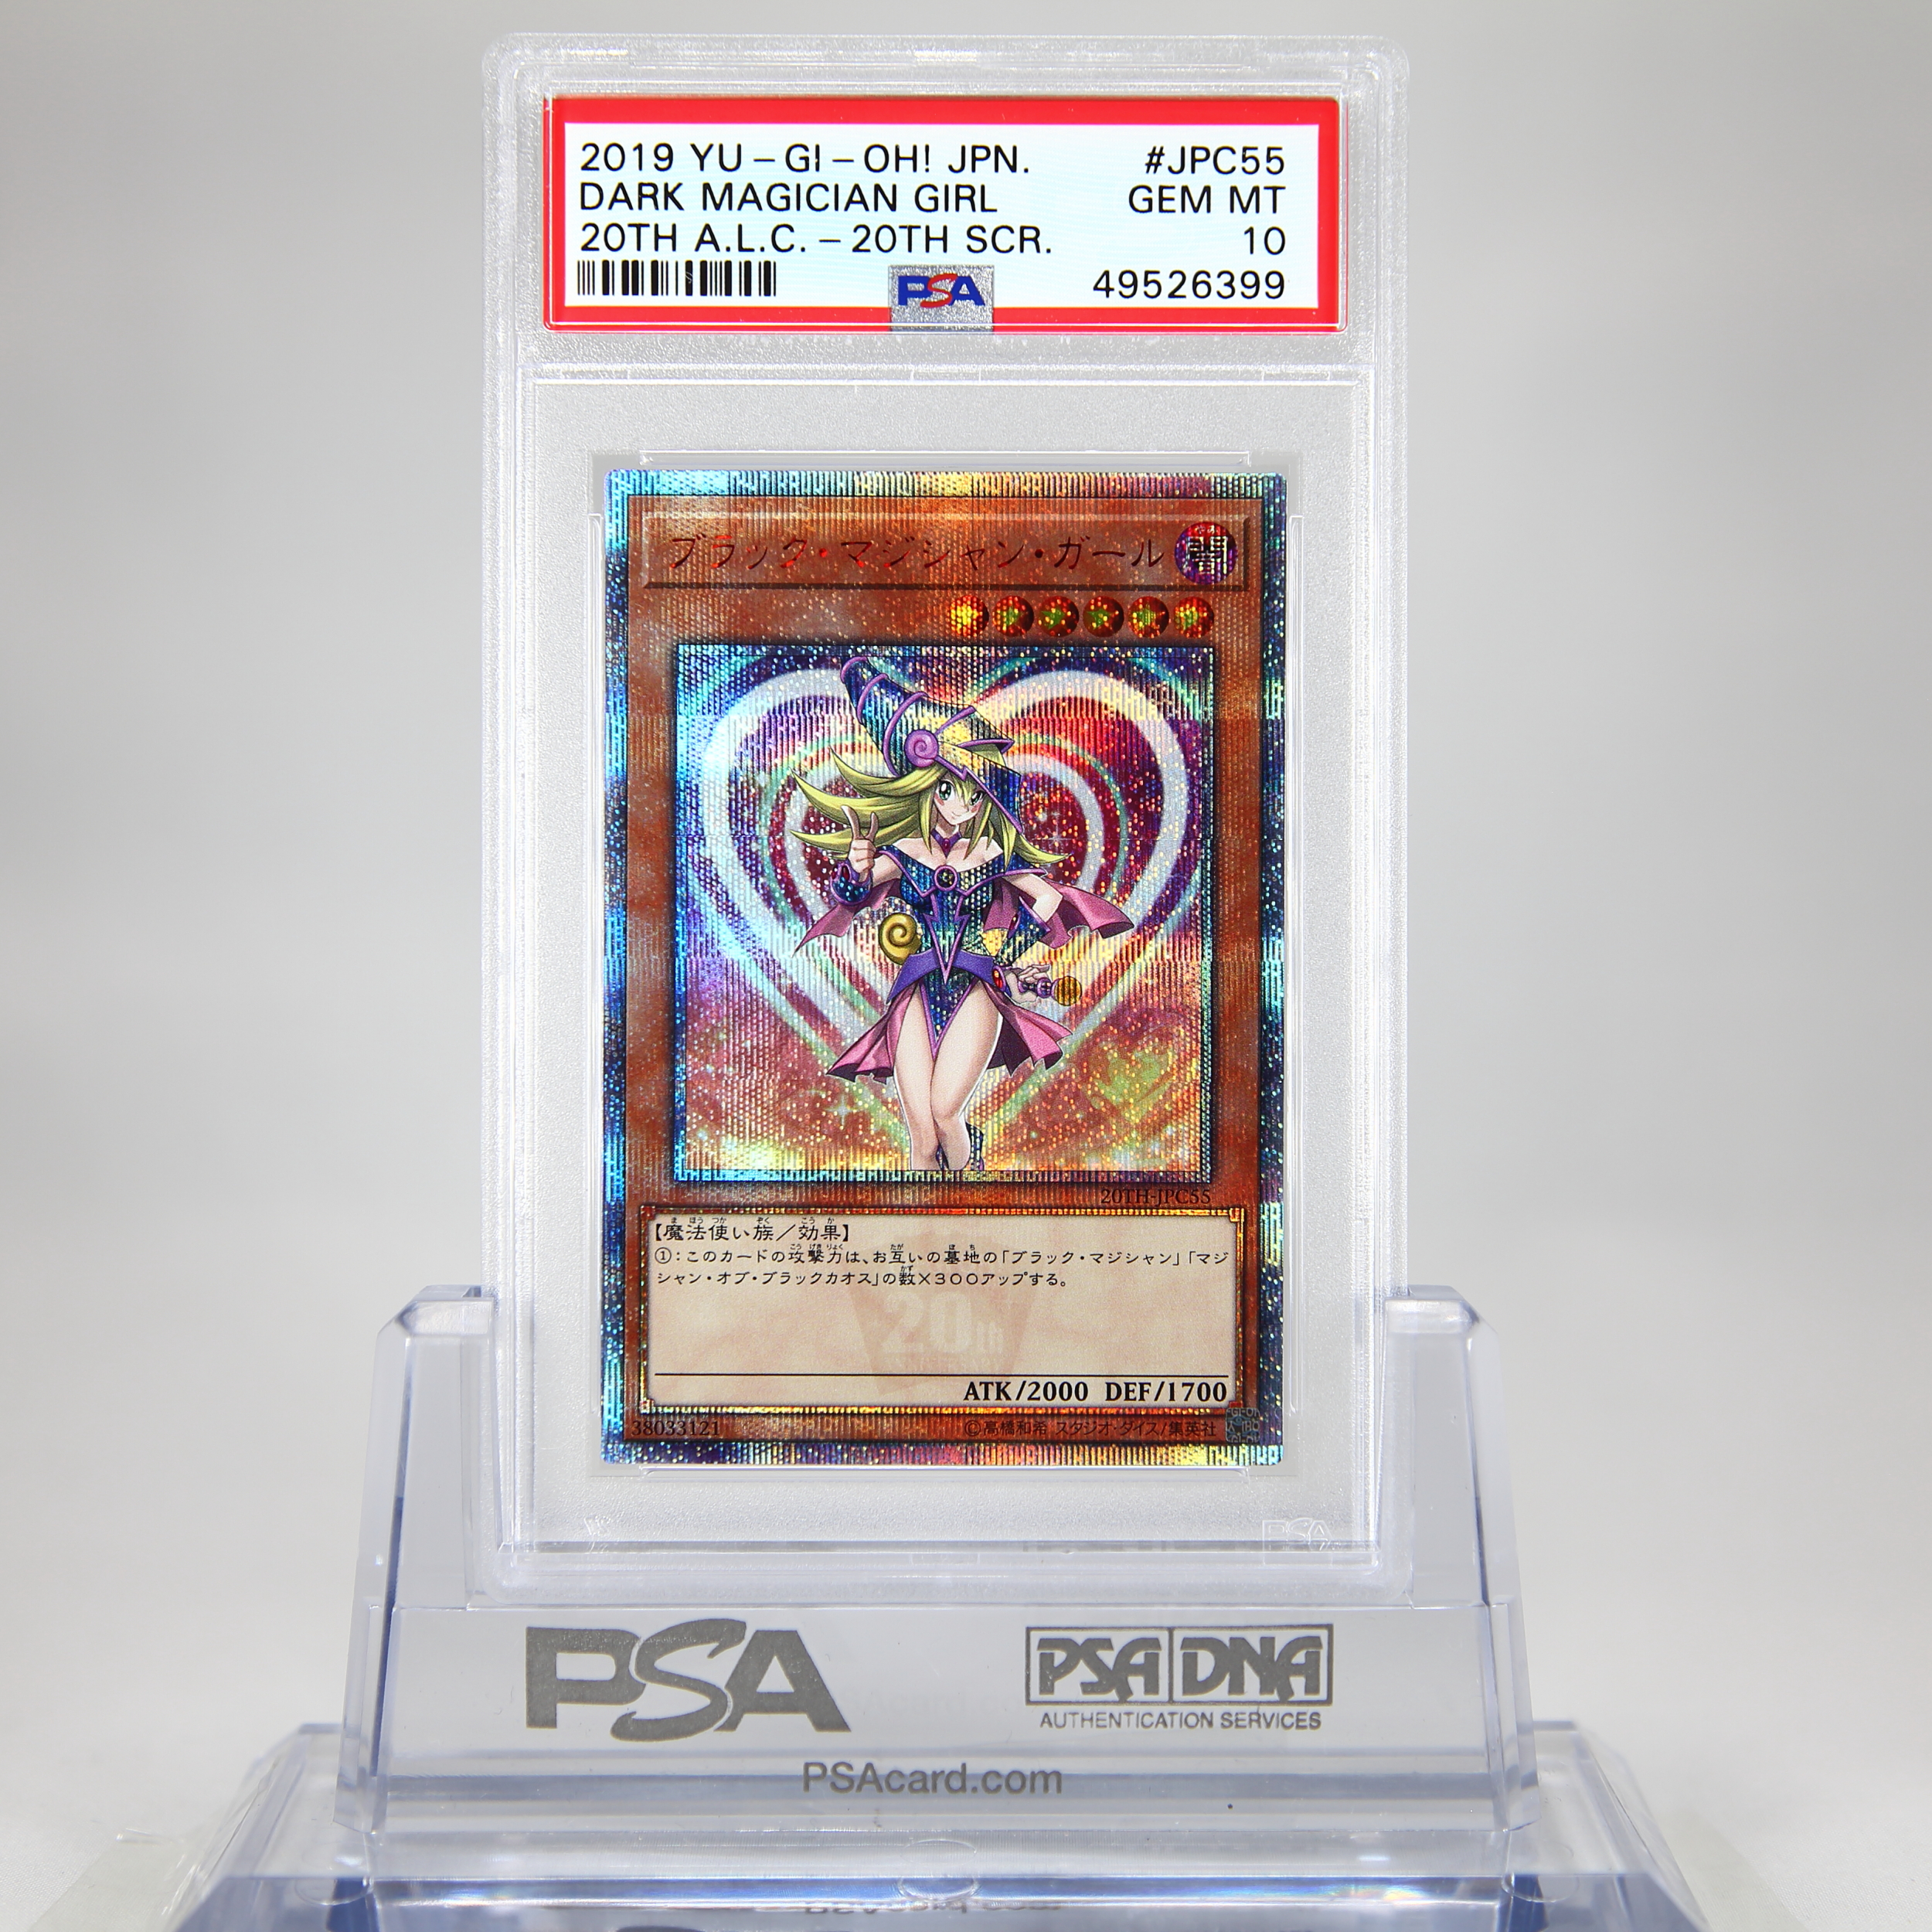 Psa10 Gem Mint ブラックマジシャンガール thシークレットレア The Card All For Collectors